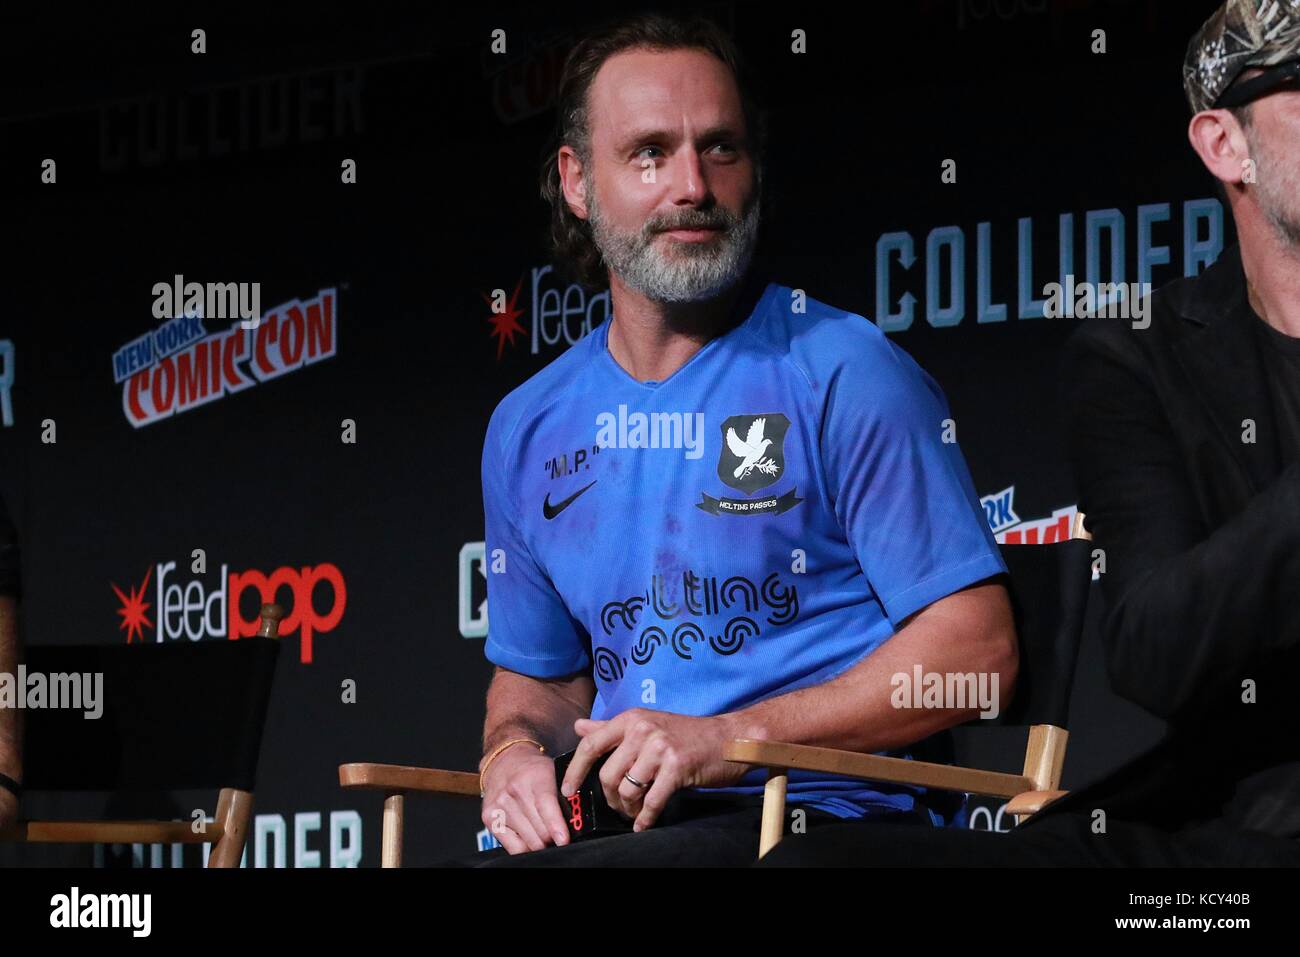 New York, NY, USA. Okt. 2017. Andrew Lincoln im AMC's The Walking Dead Panel in New York Comic Con am 7. Oktober 2017 in New York City. Credit: Diego Corredor/Media Punch/Alamy Live News Stockfoto